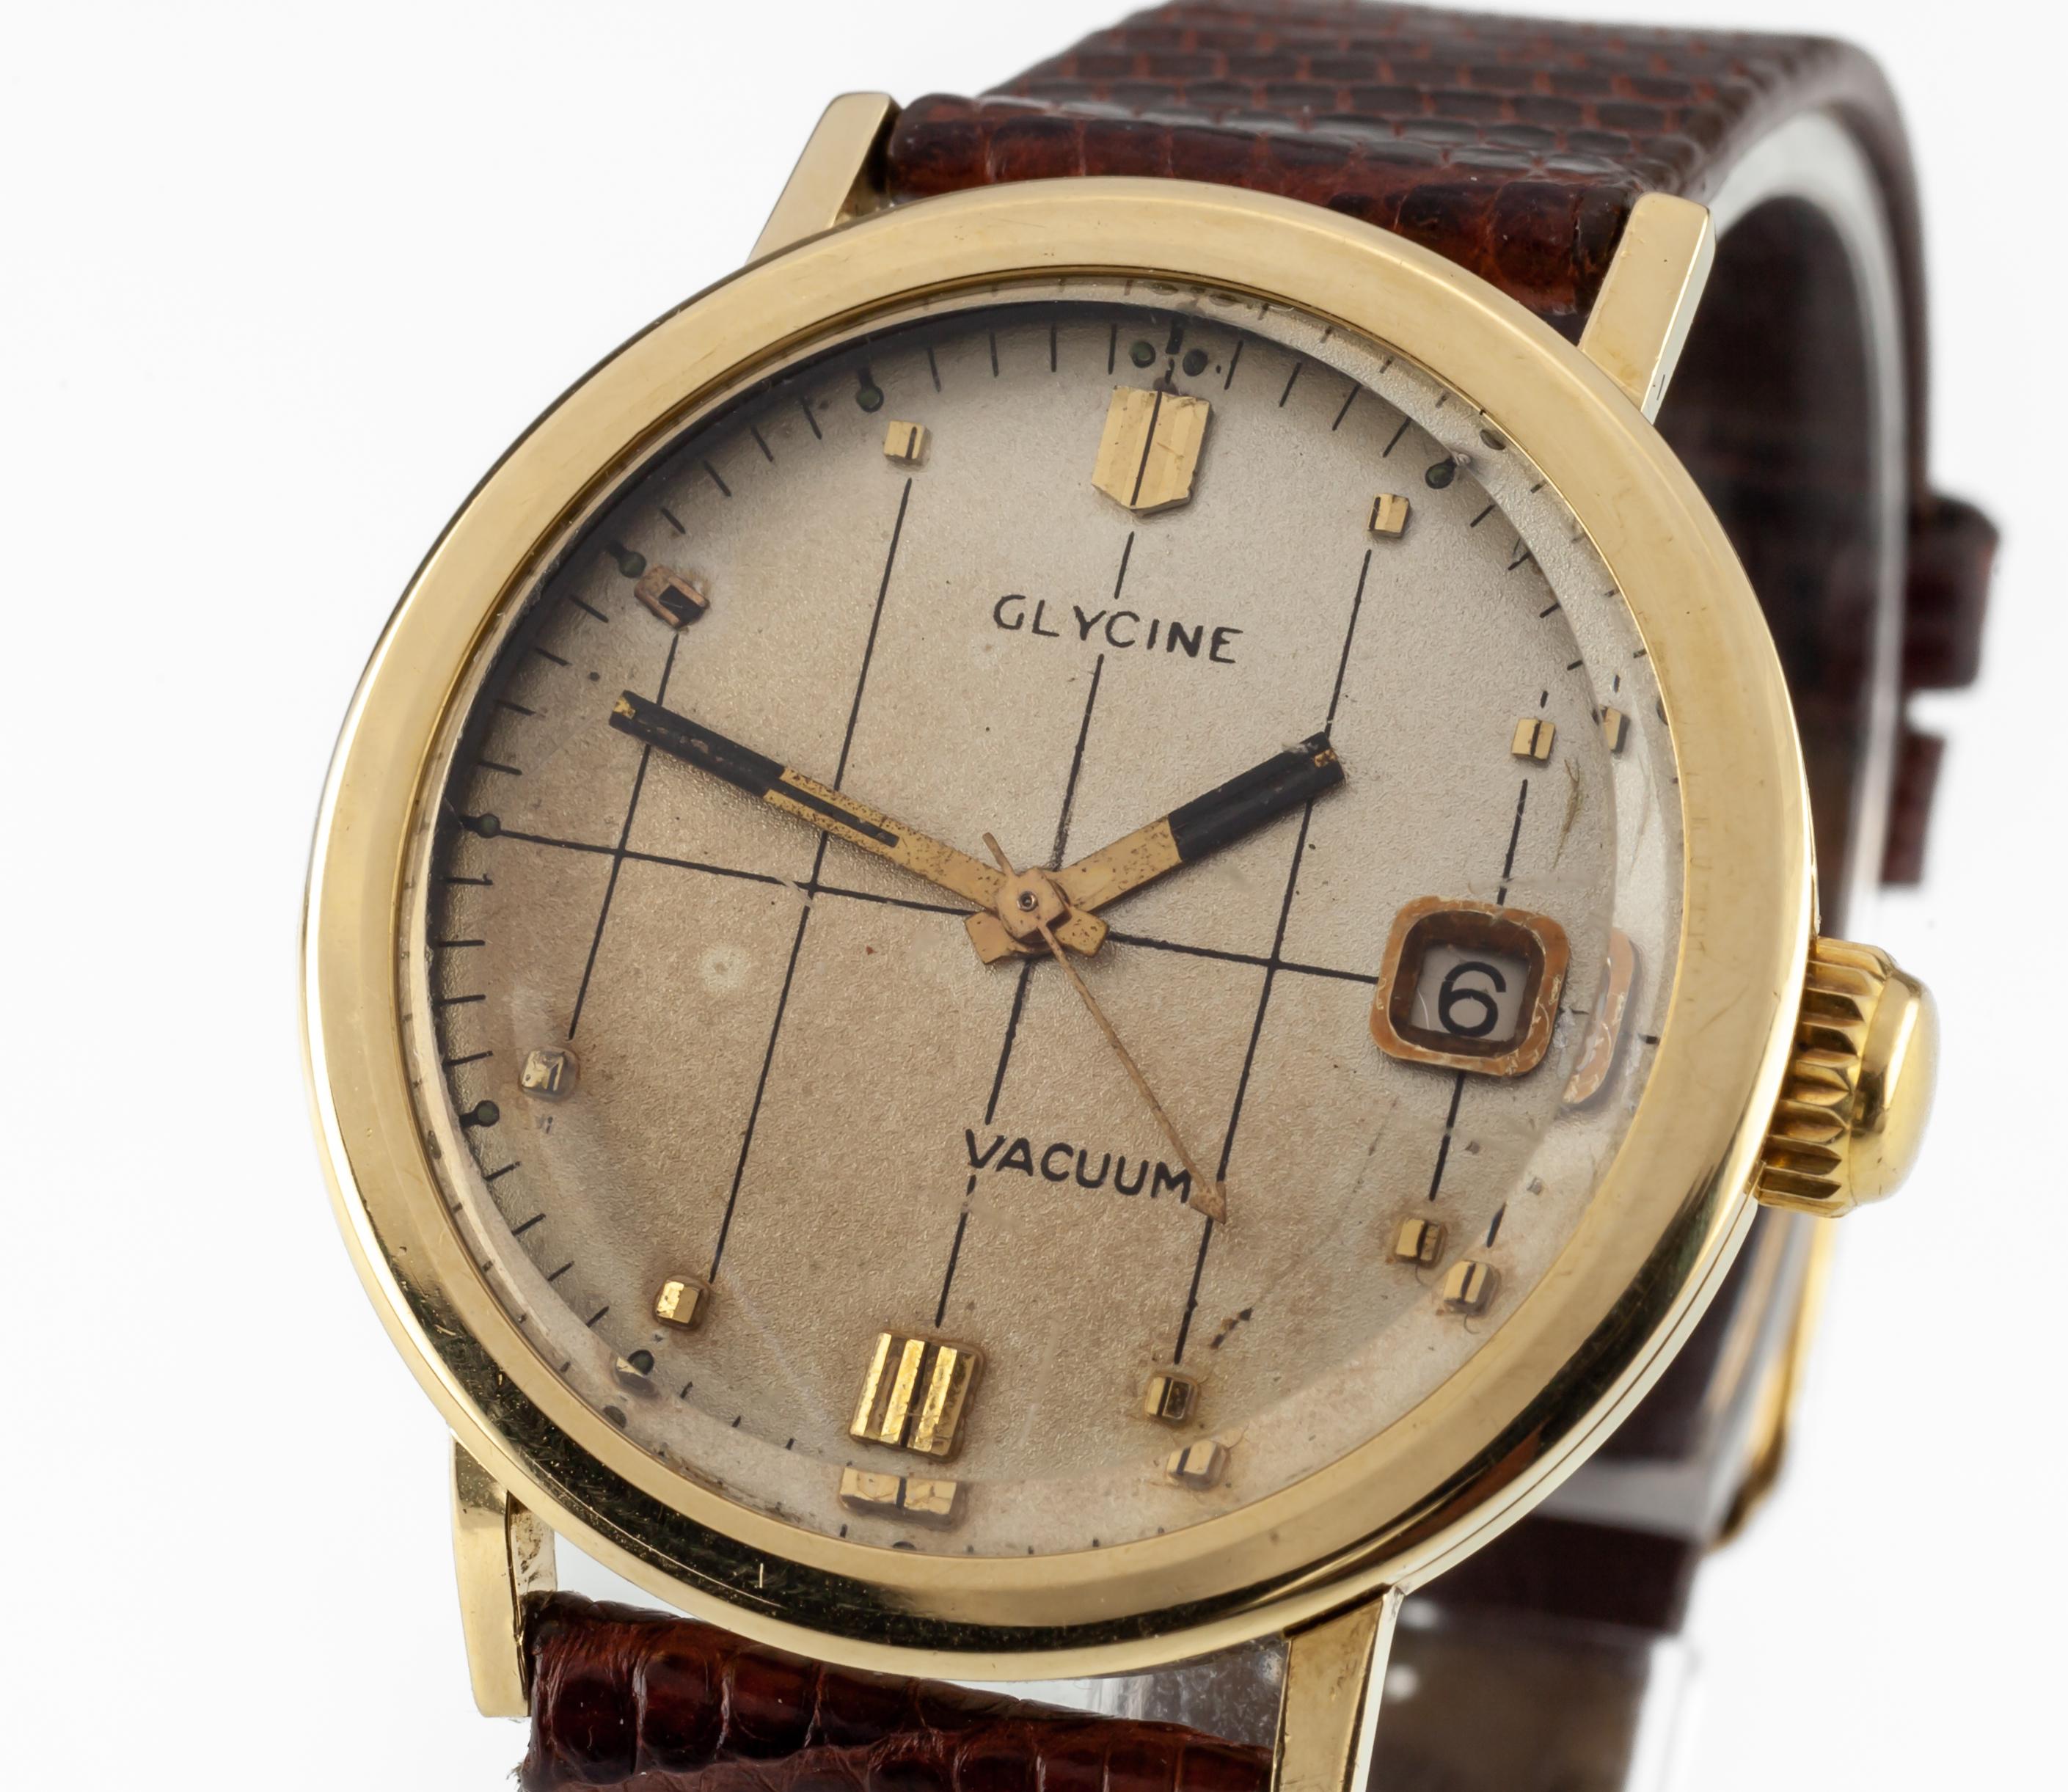 
Glycine 18k Yellow Gold Men's Vintage Vacuum Automatic Watch 2472
Movement #2472
Case #0812-35367
18k Yellow Gold Round Case
34 mm in Diameter (36 mm w/ Crown)
Lug-to-Lug Distance = 40 mm
Lug-to-Lug Width = 17 mm
Thickness = 10 mm
Champagne Dial w/